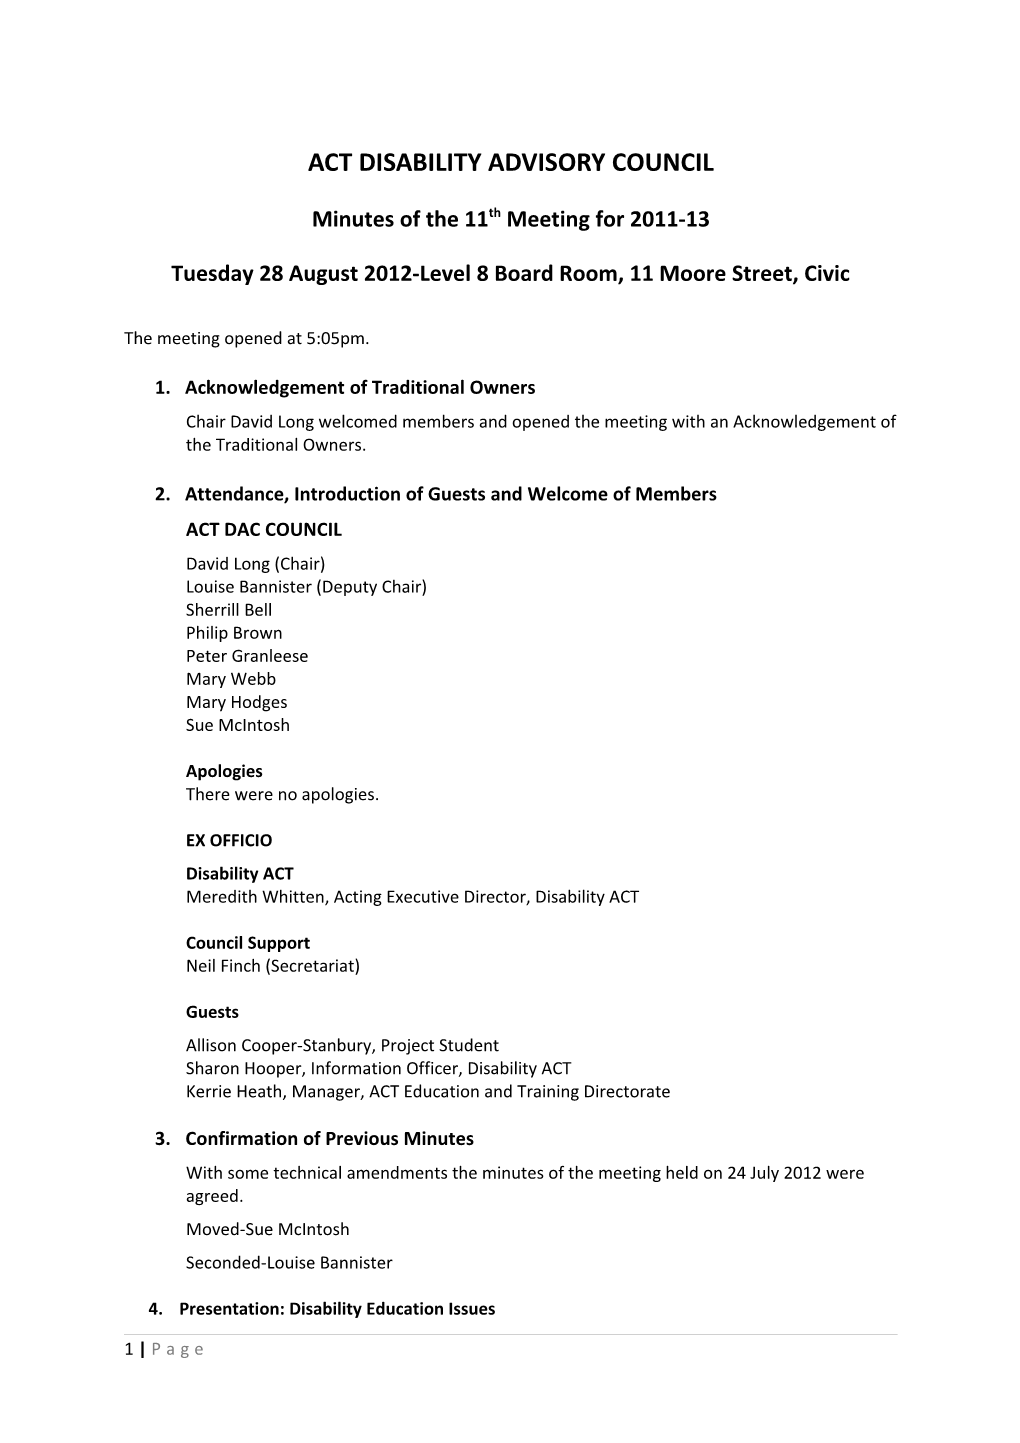 ACT Disability Advisory Council Meeting Minutes 28.08.12